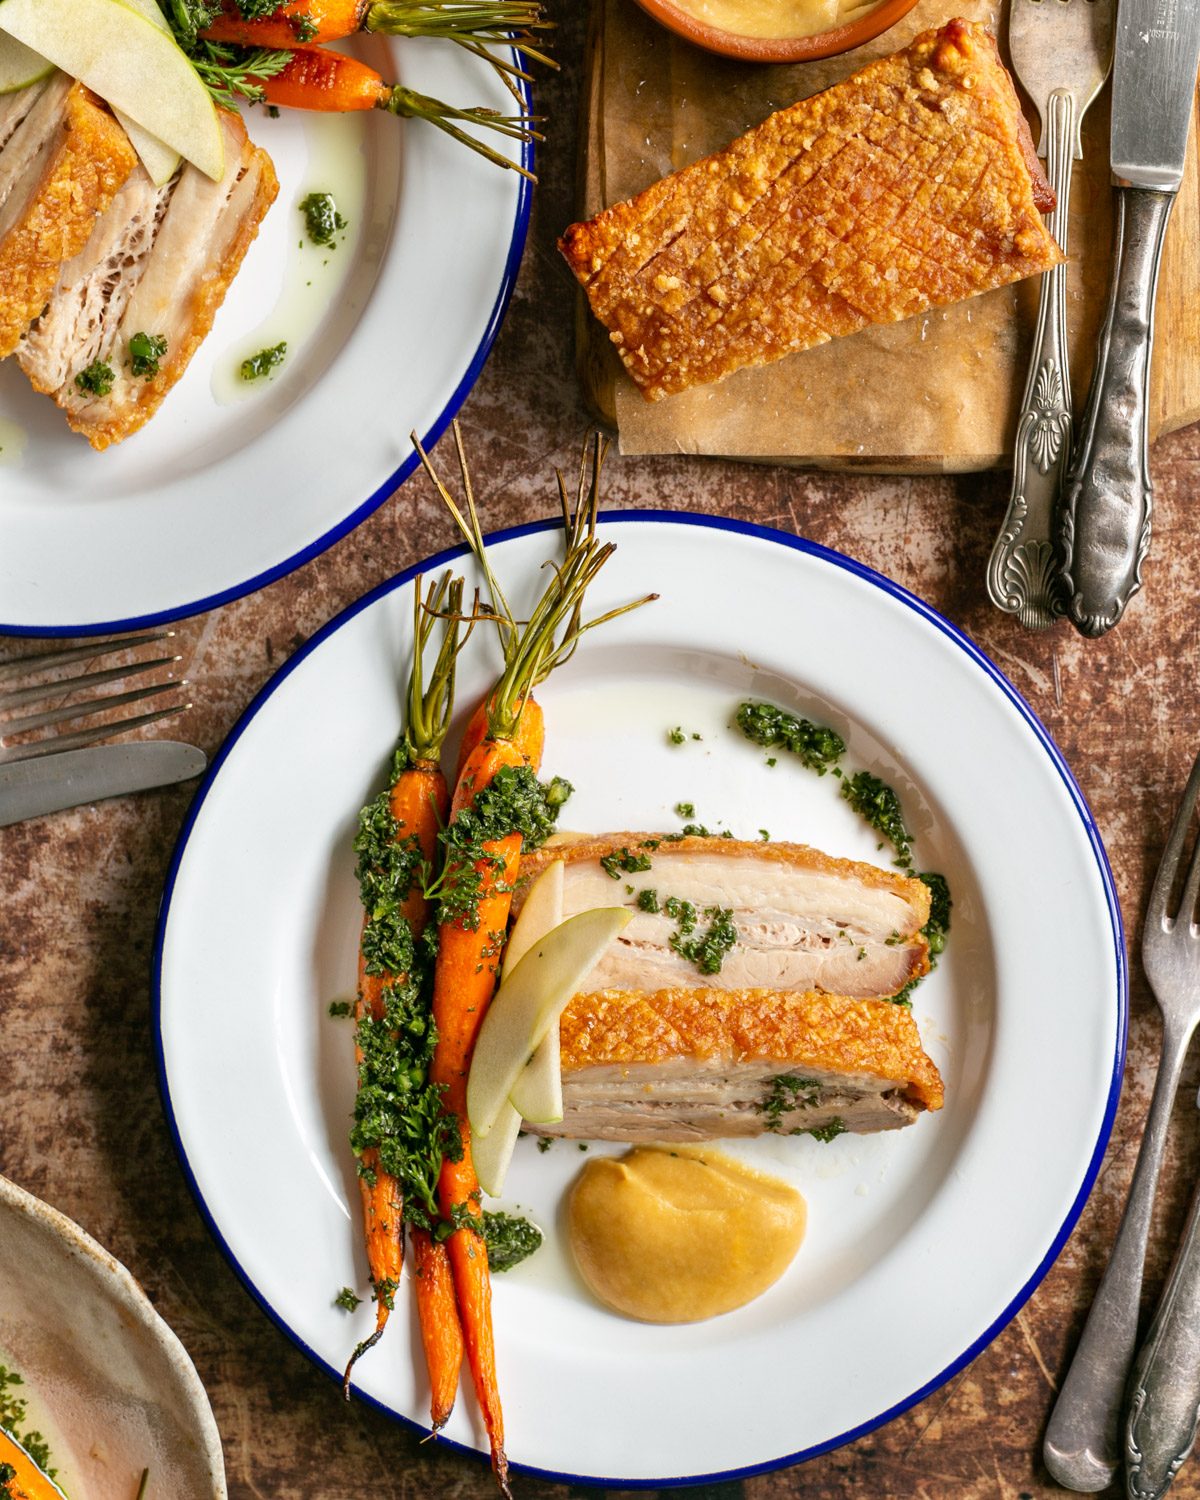 Crispy pork belly with roasted carrots and apple sauce